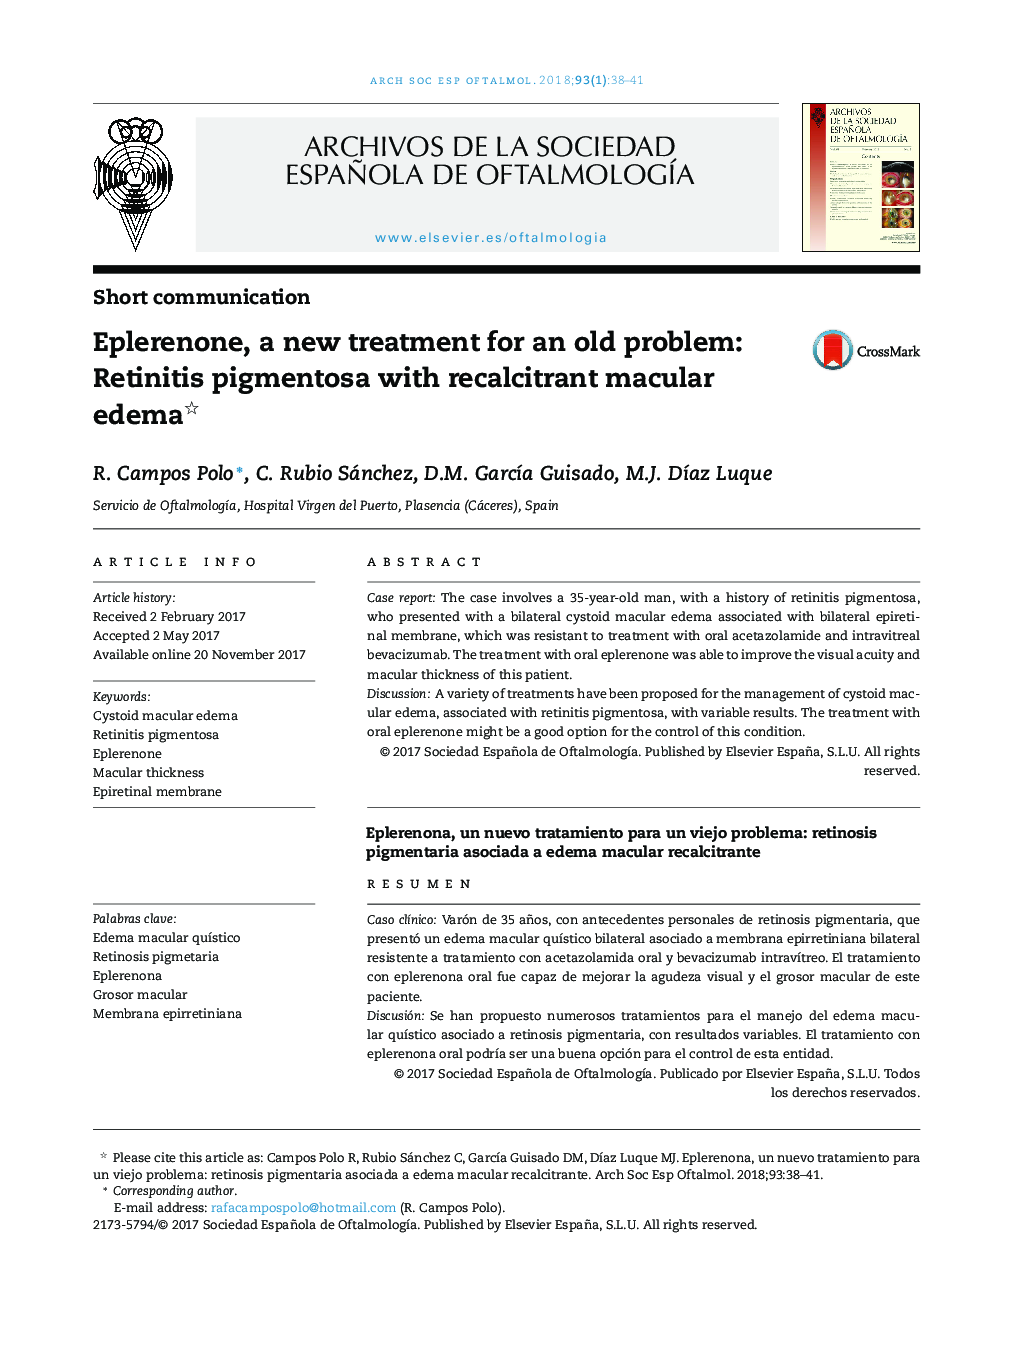 Eplerenone, a new treatment for an old problem: Retinitis pigmentosa with recalcitrant macular edema